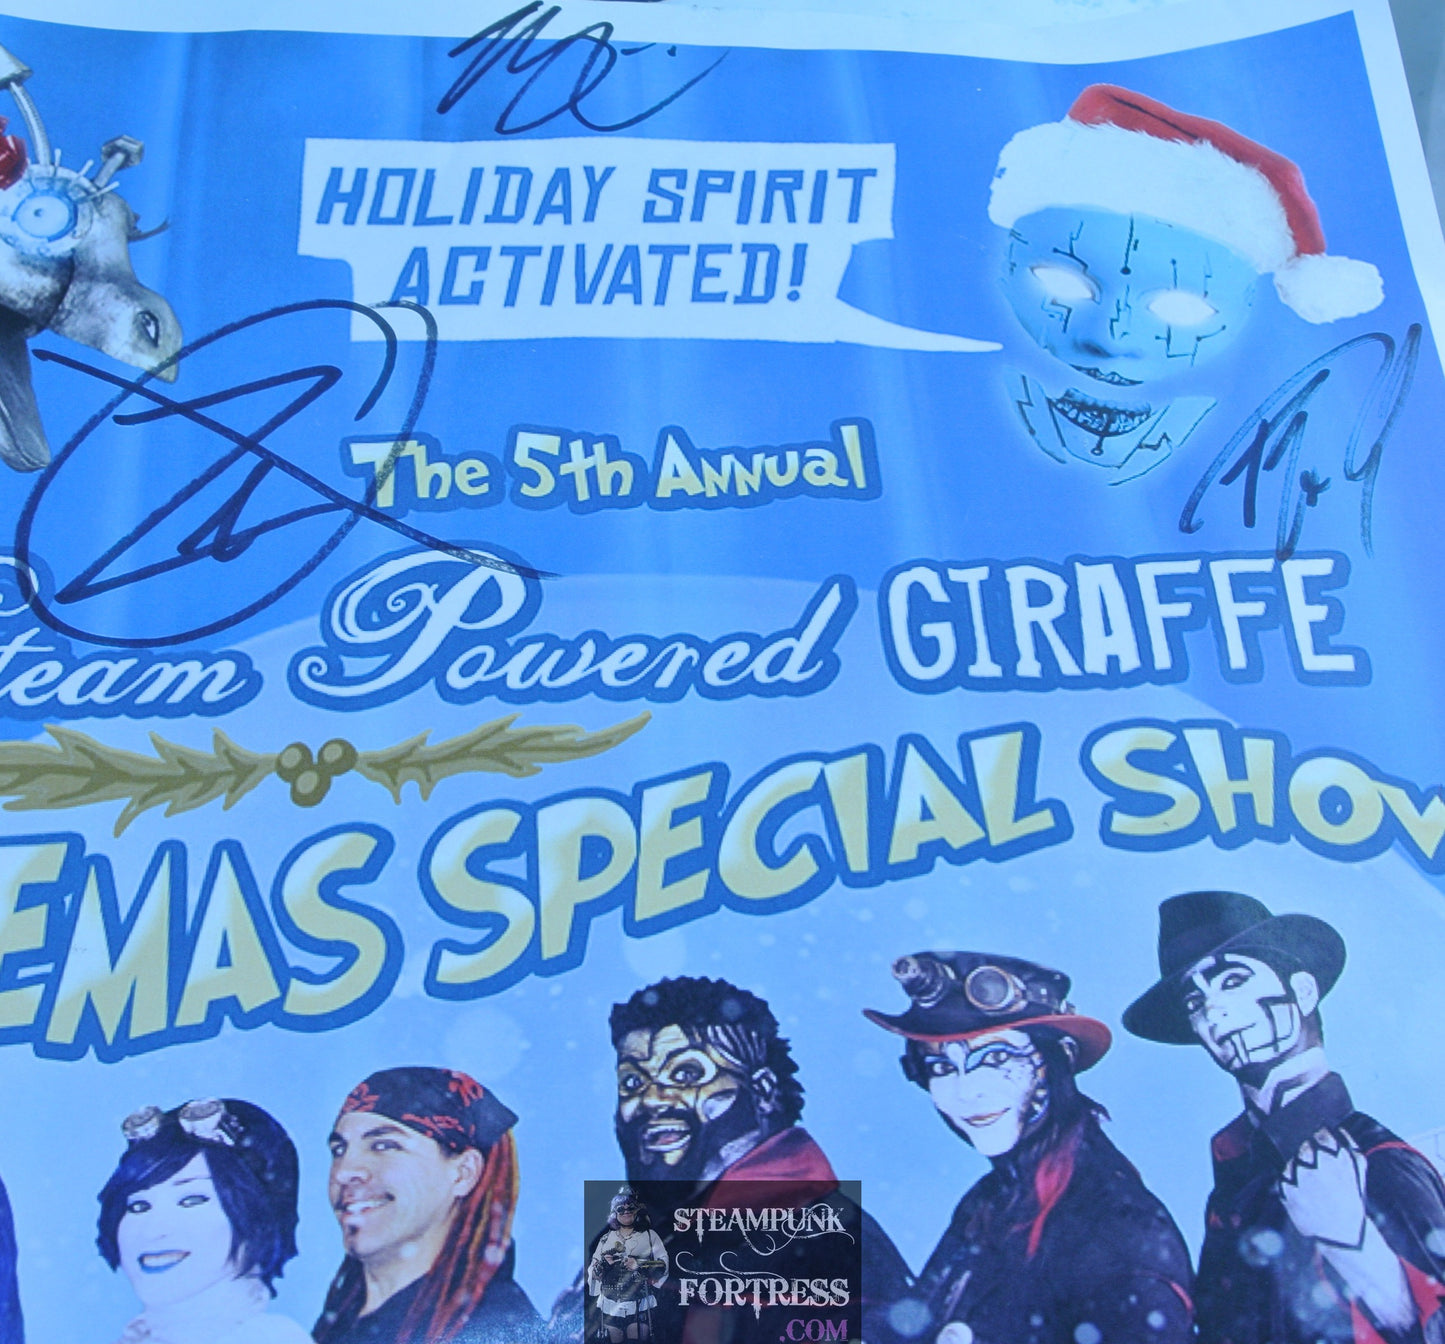 STEAM POWERED GIRAFFE AUTOGRAPHED SIGNED POSTER 11" X 17" THE SPINE RABBIT ZERO